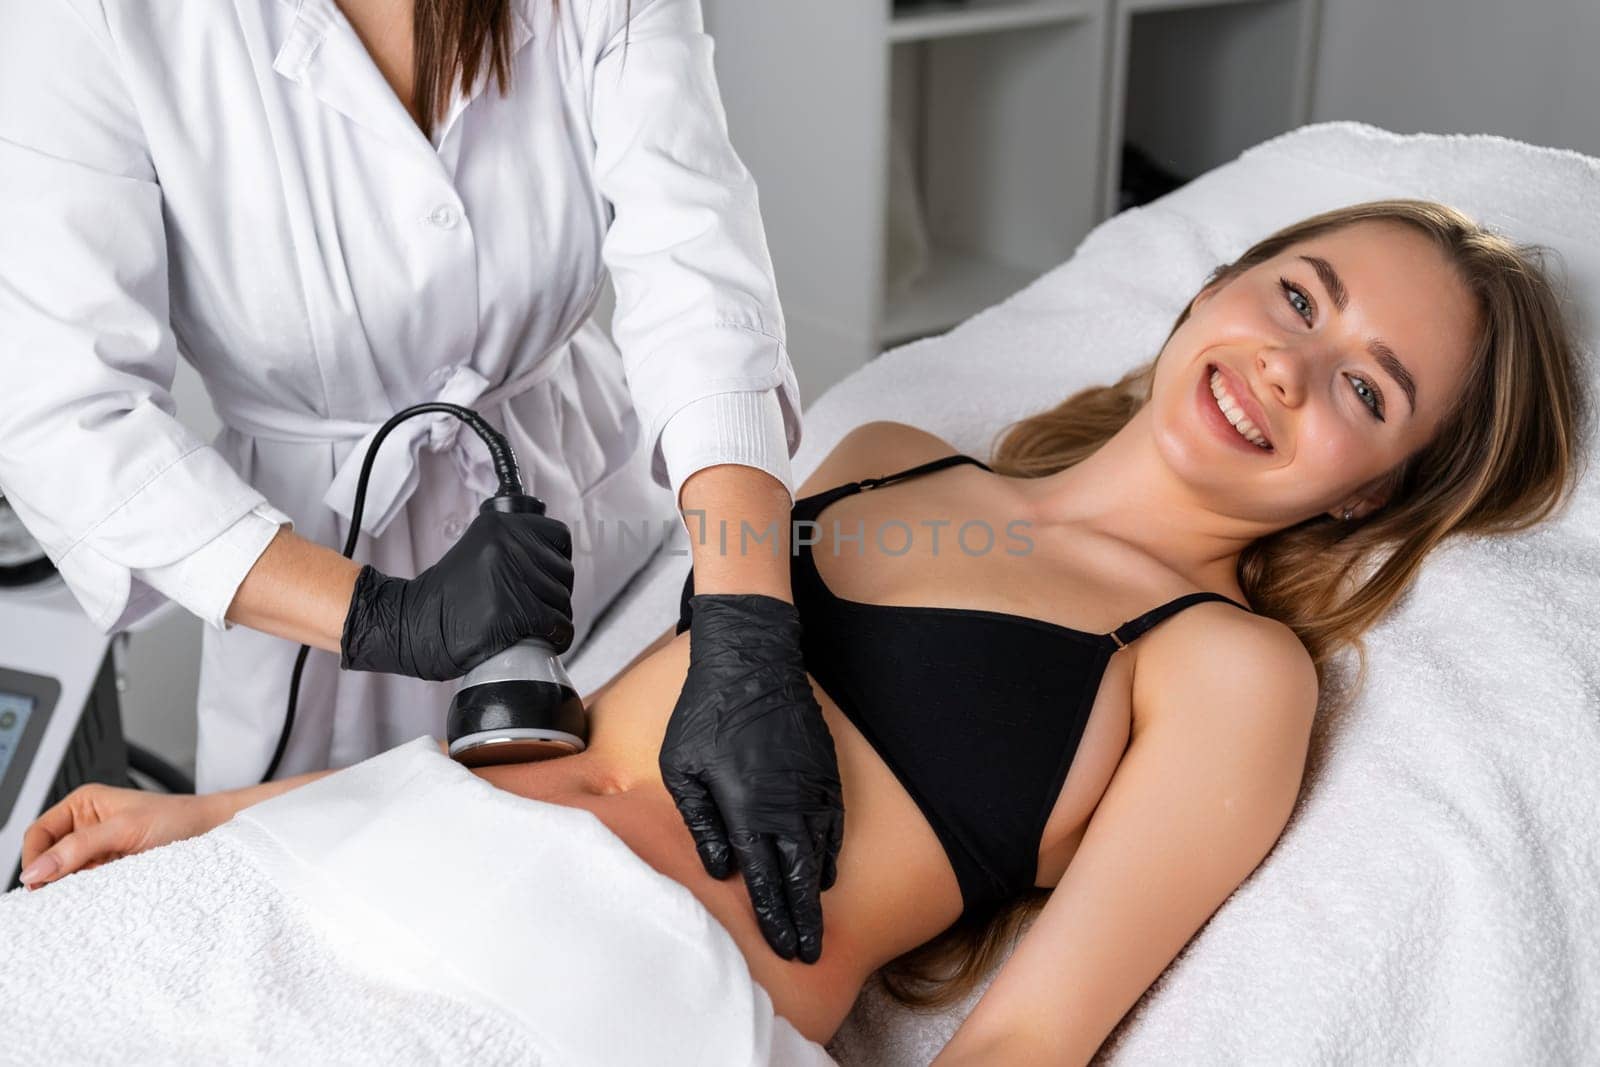 Young smiling woman during ultrasound cavitation body contouring treatment procedure by vladimka